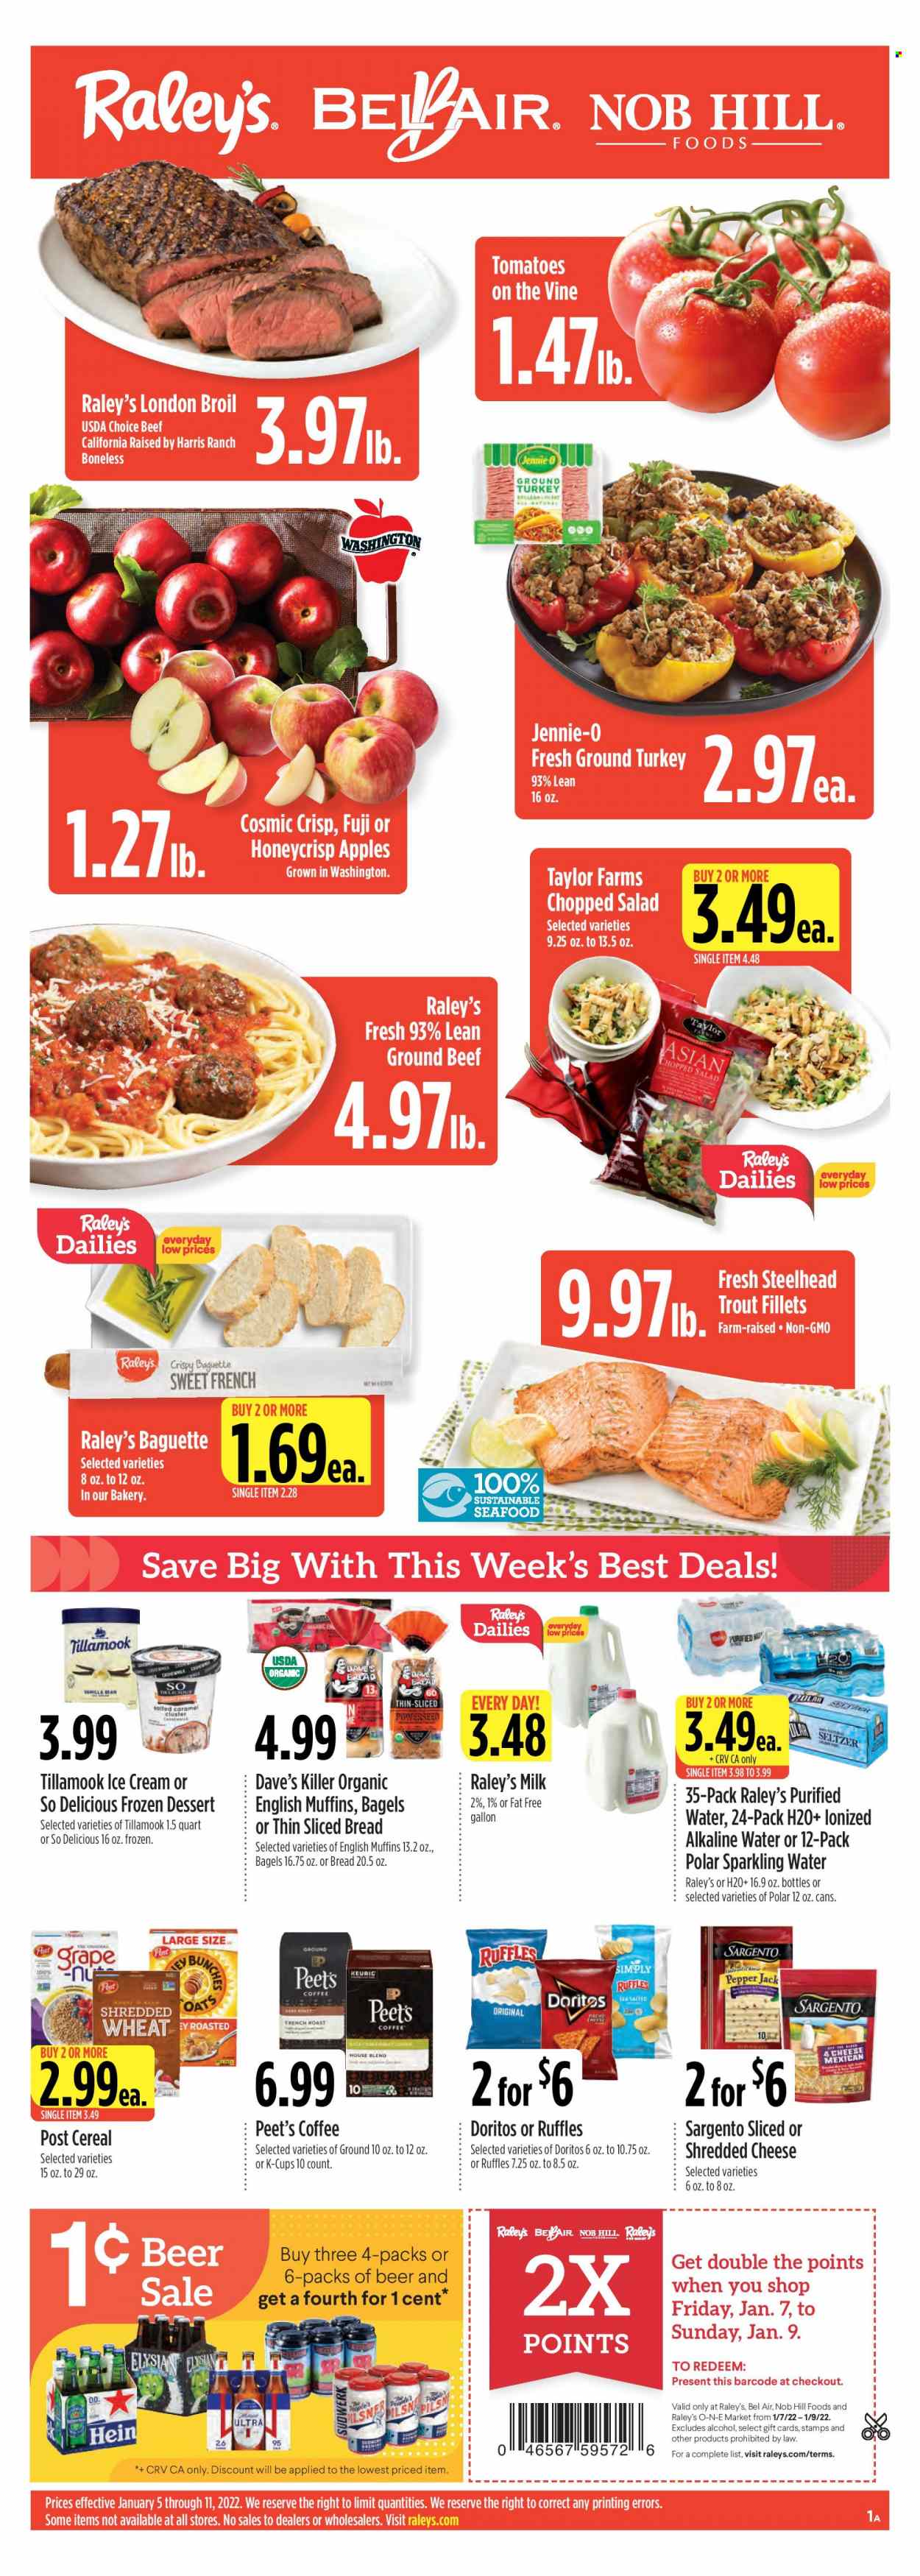 thumbnail - Raley's Flyer - 01/05/2022 - 01/11/2022 - Sales products - bagels, baguette, bread, english muffins, tomatoes, salad, chopped salad, apples, trout, shredded cheese, Pepper Jack cheese, Sargento, milk, ice cream, Doritos, Ruffles, oats, Harris, cereals, caramel, seltzer water, sparkling water, purified water, alkaline water, coffee, coffee capsules, K-Cups, Keurig, beer, ground turkey, beef meat, ground beef. Page 1.